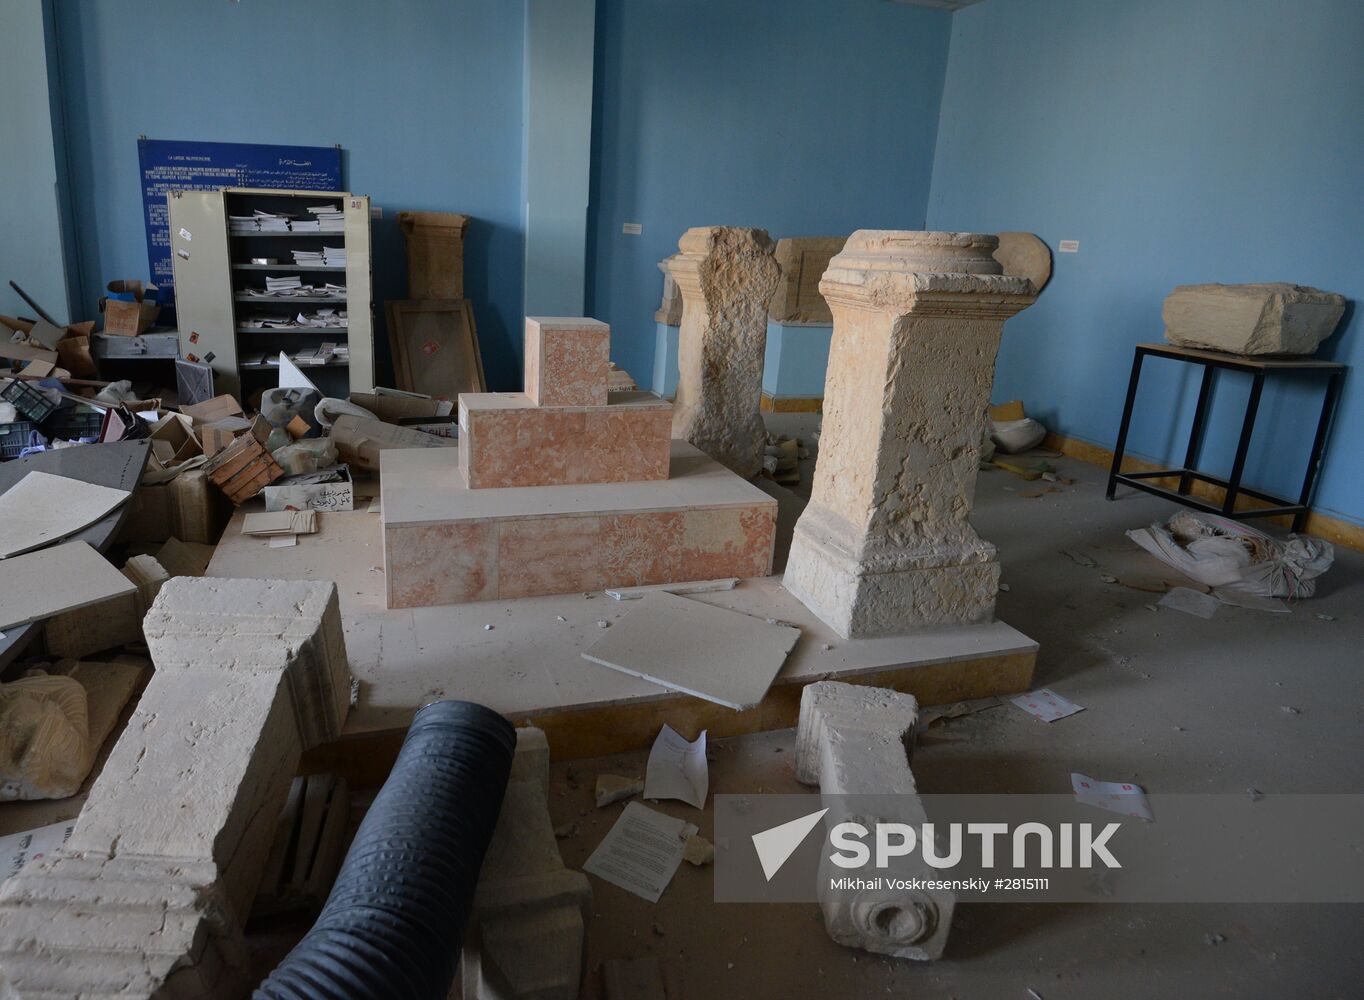 Museums in liberated Palmyra